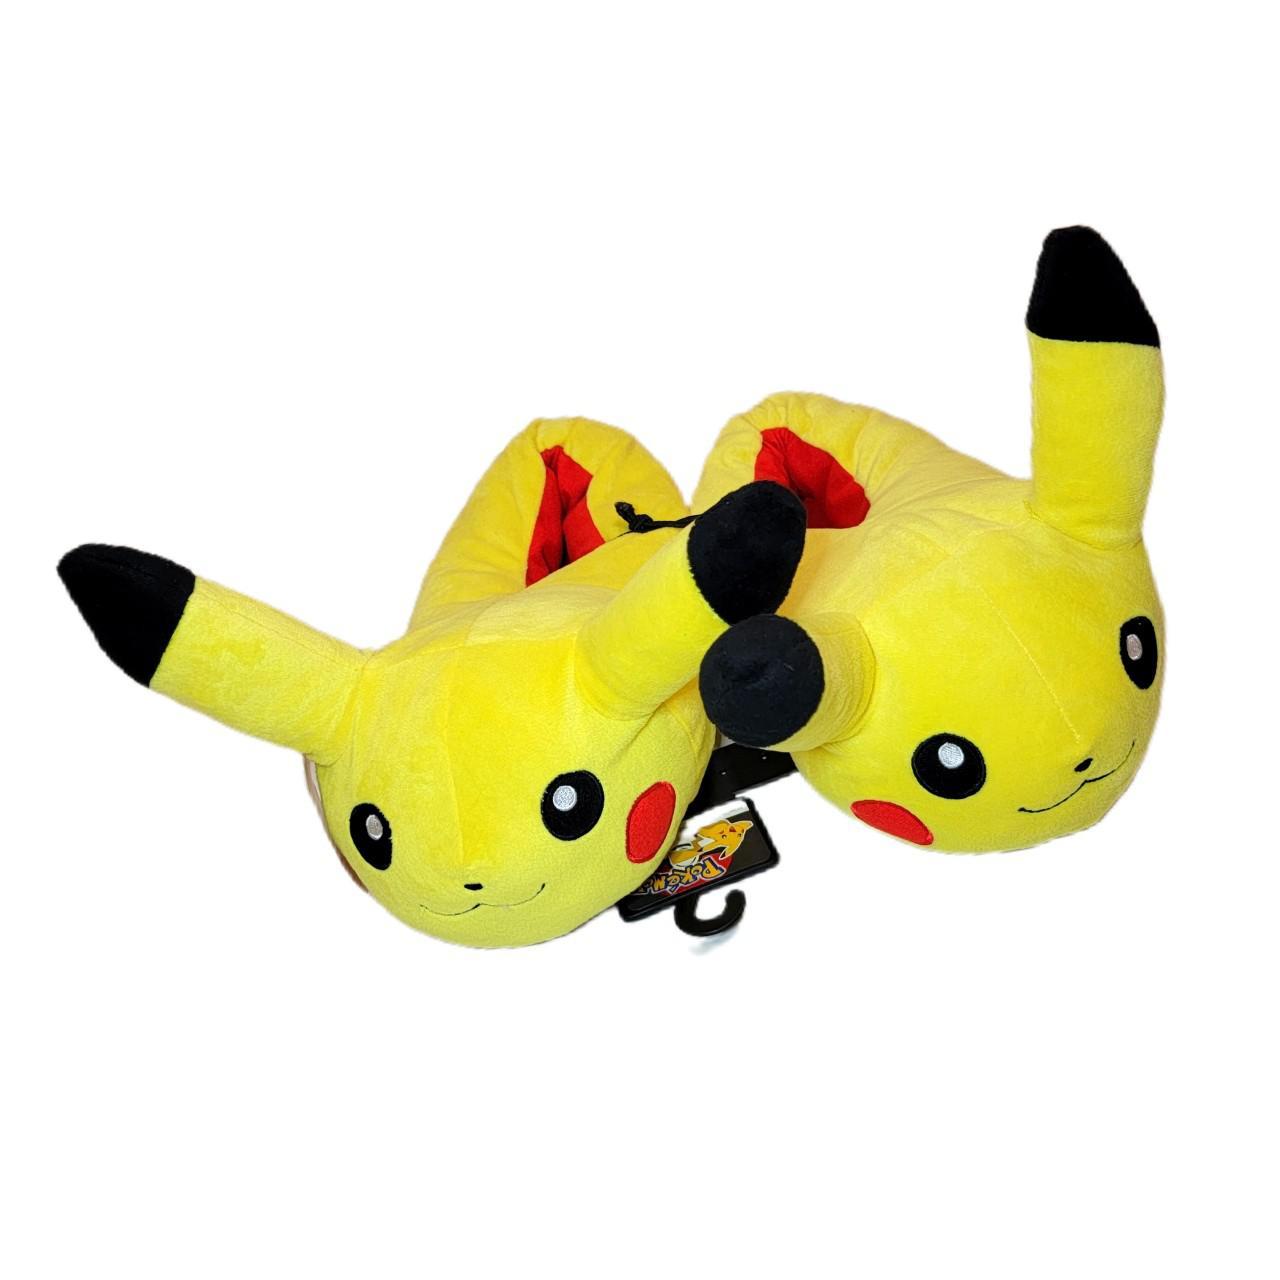 Product Image 1 - ⚡️ retro pikachu slippers ⚡️

official